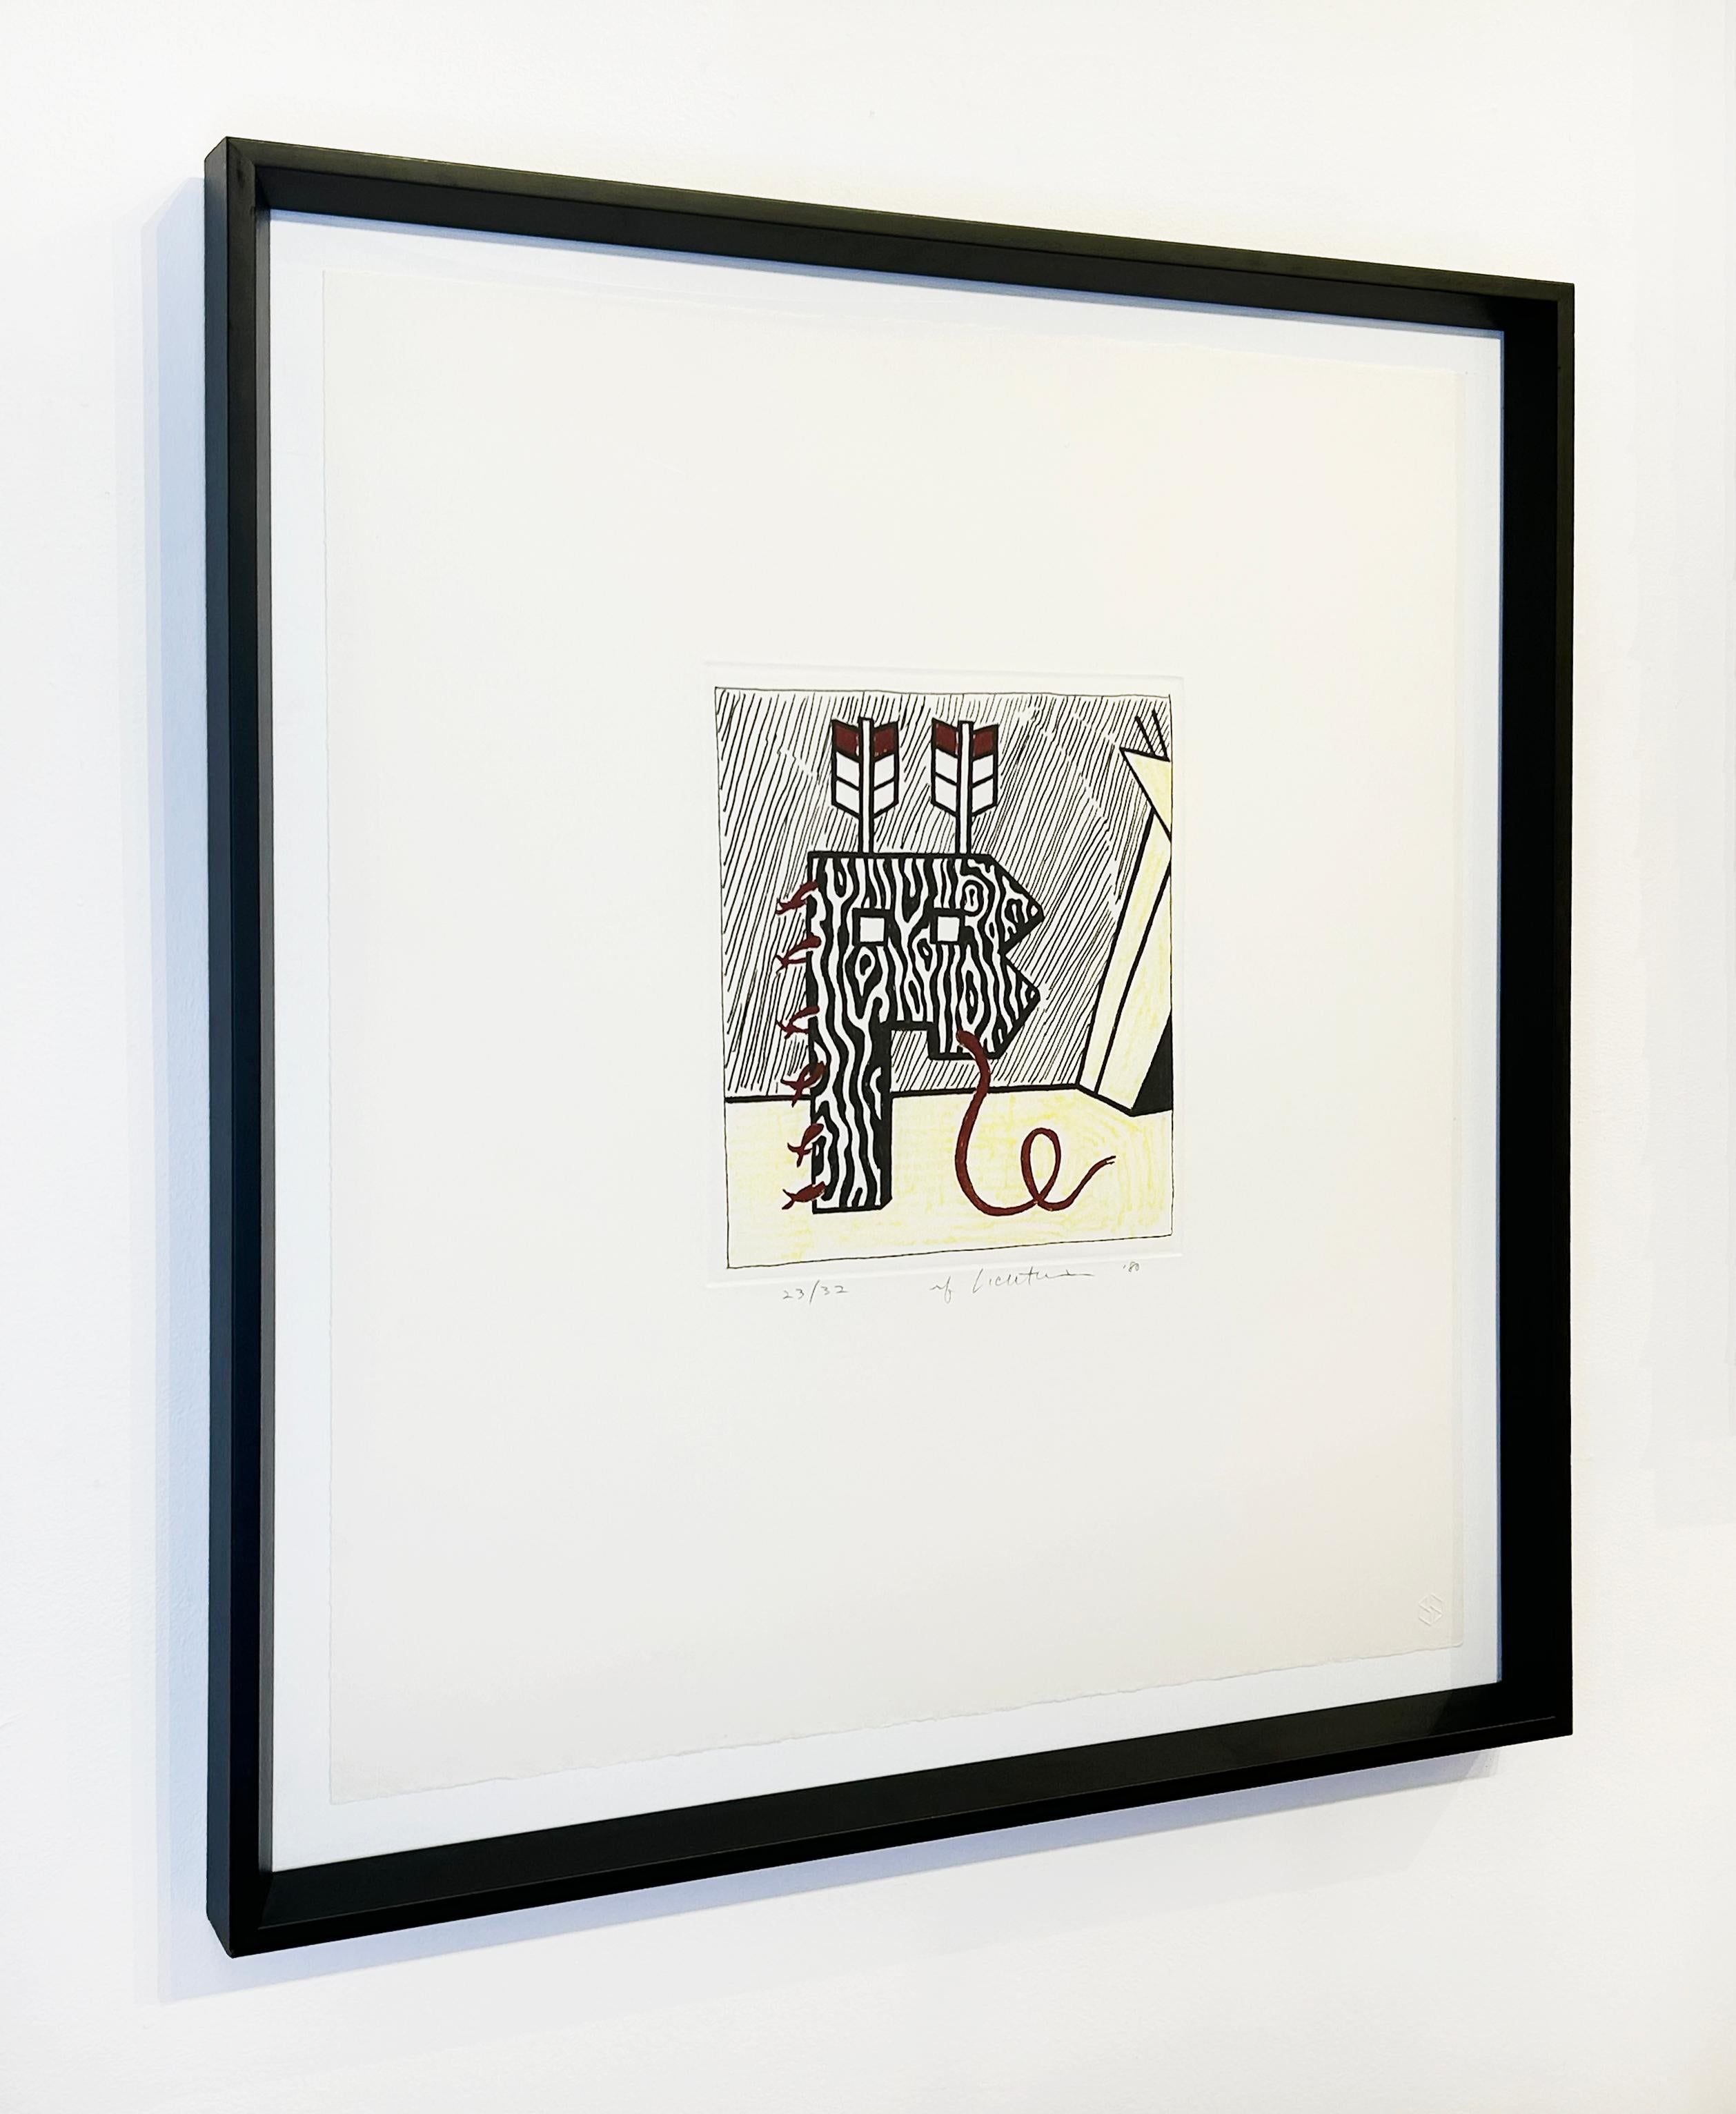 Artist:  Lichtenstein, Roy
Title:  Figure with Teepee
Series:  American Indian Theme
Date:  1980
Medium:  Soft-ground etching and aquatint in colors on Lana
Framed Dimensions:  27.5